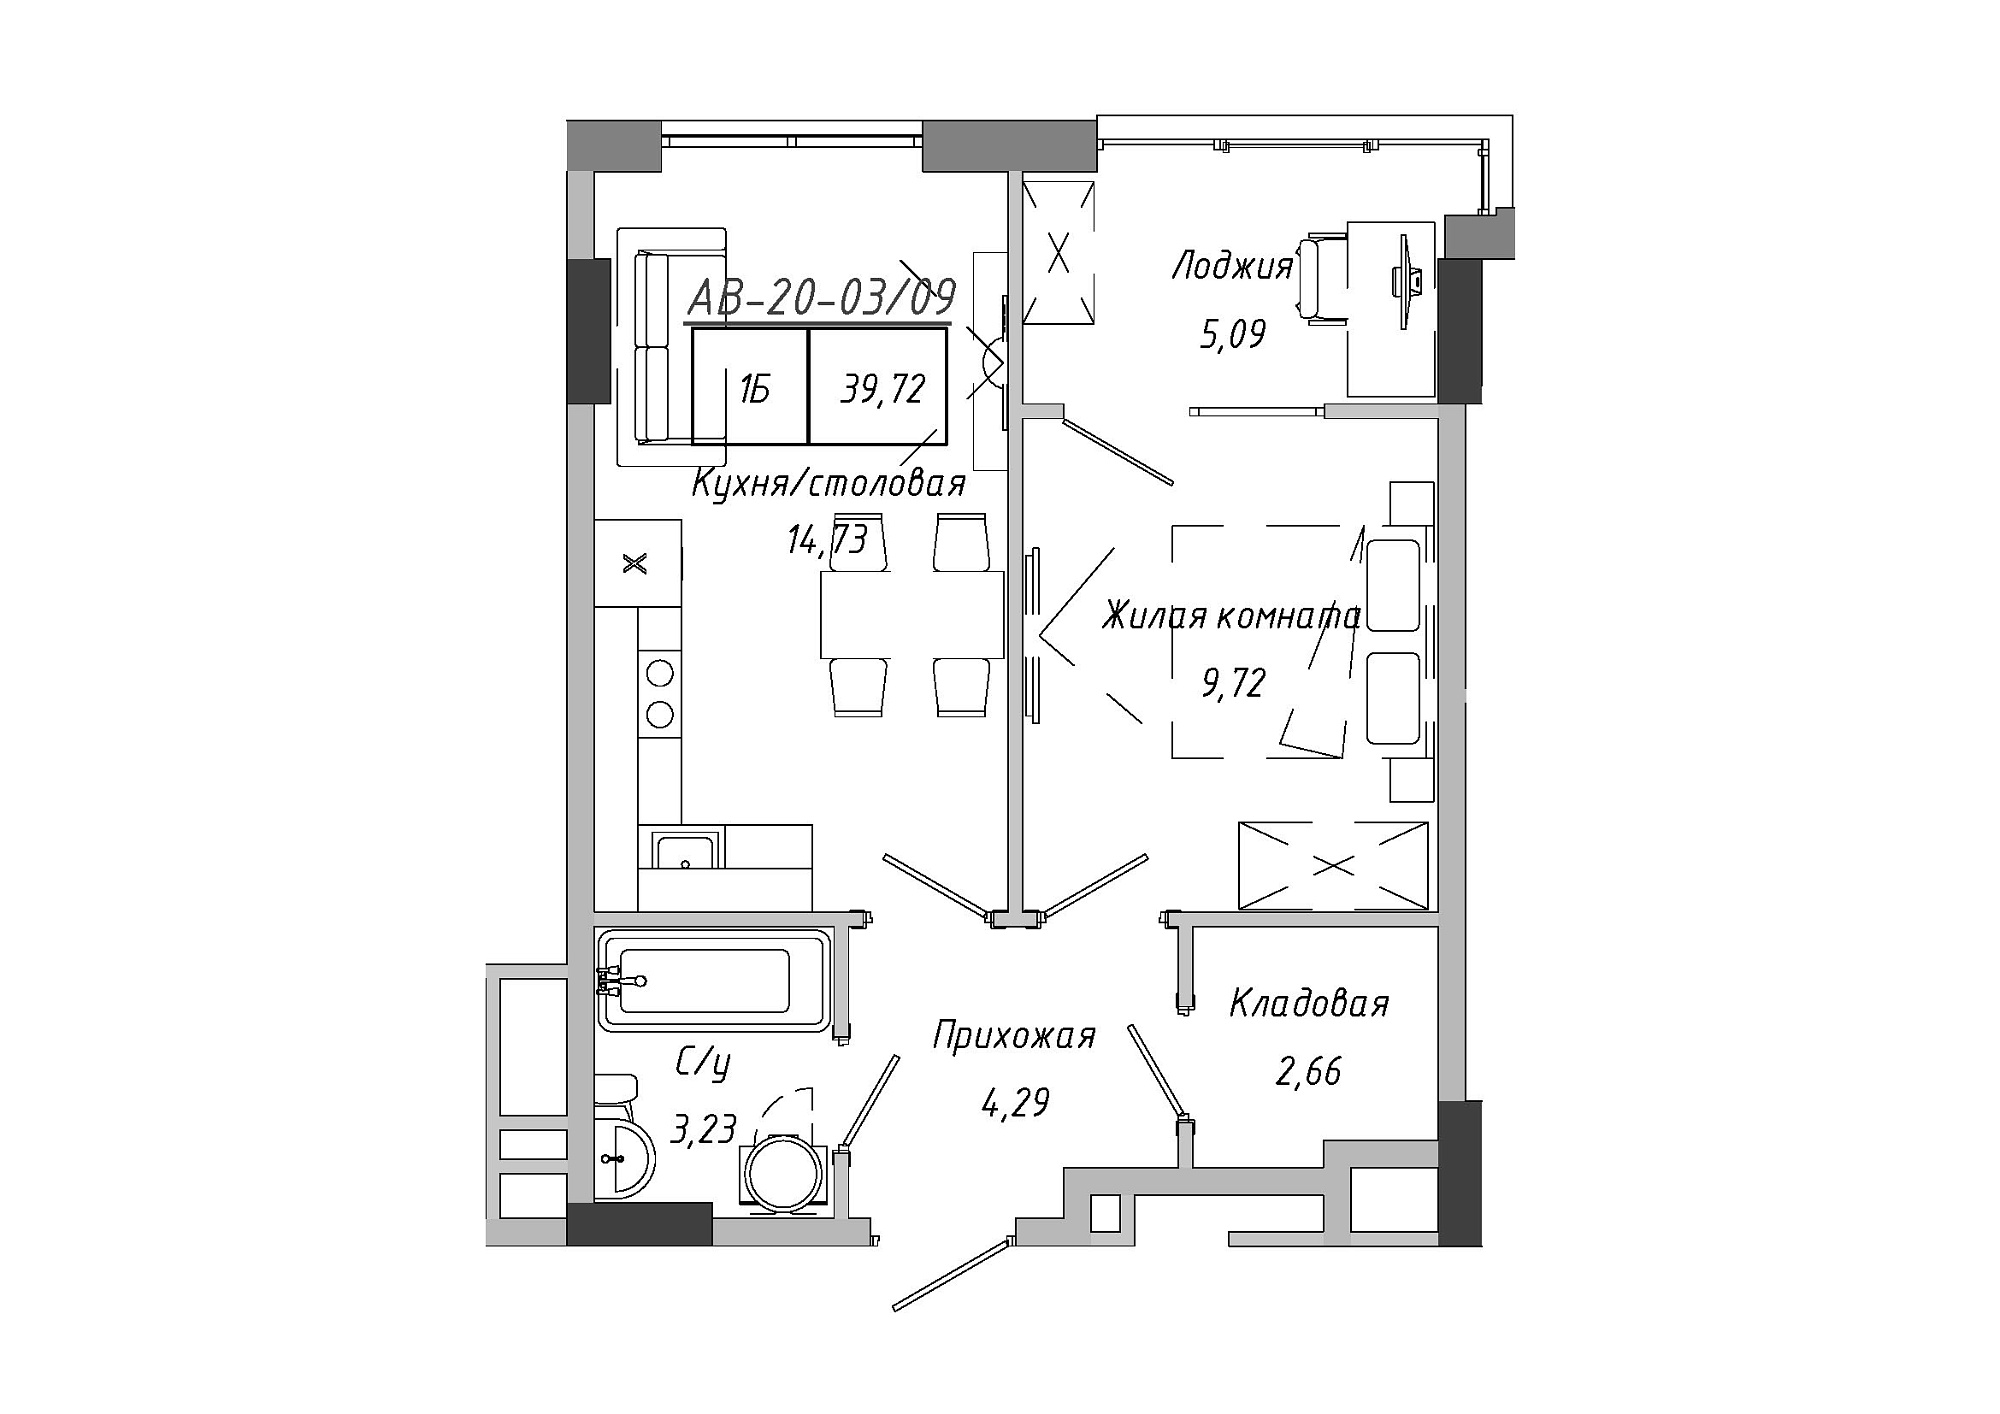 Planning 1-rm flats area 39.72m2, AB-20-03/00009.